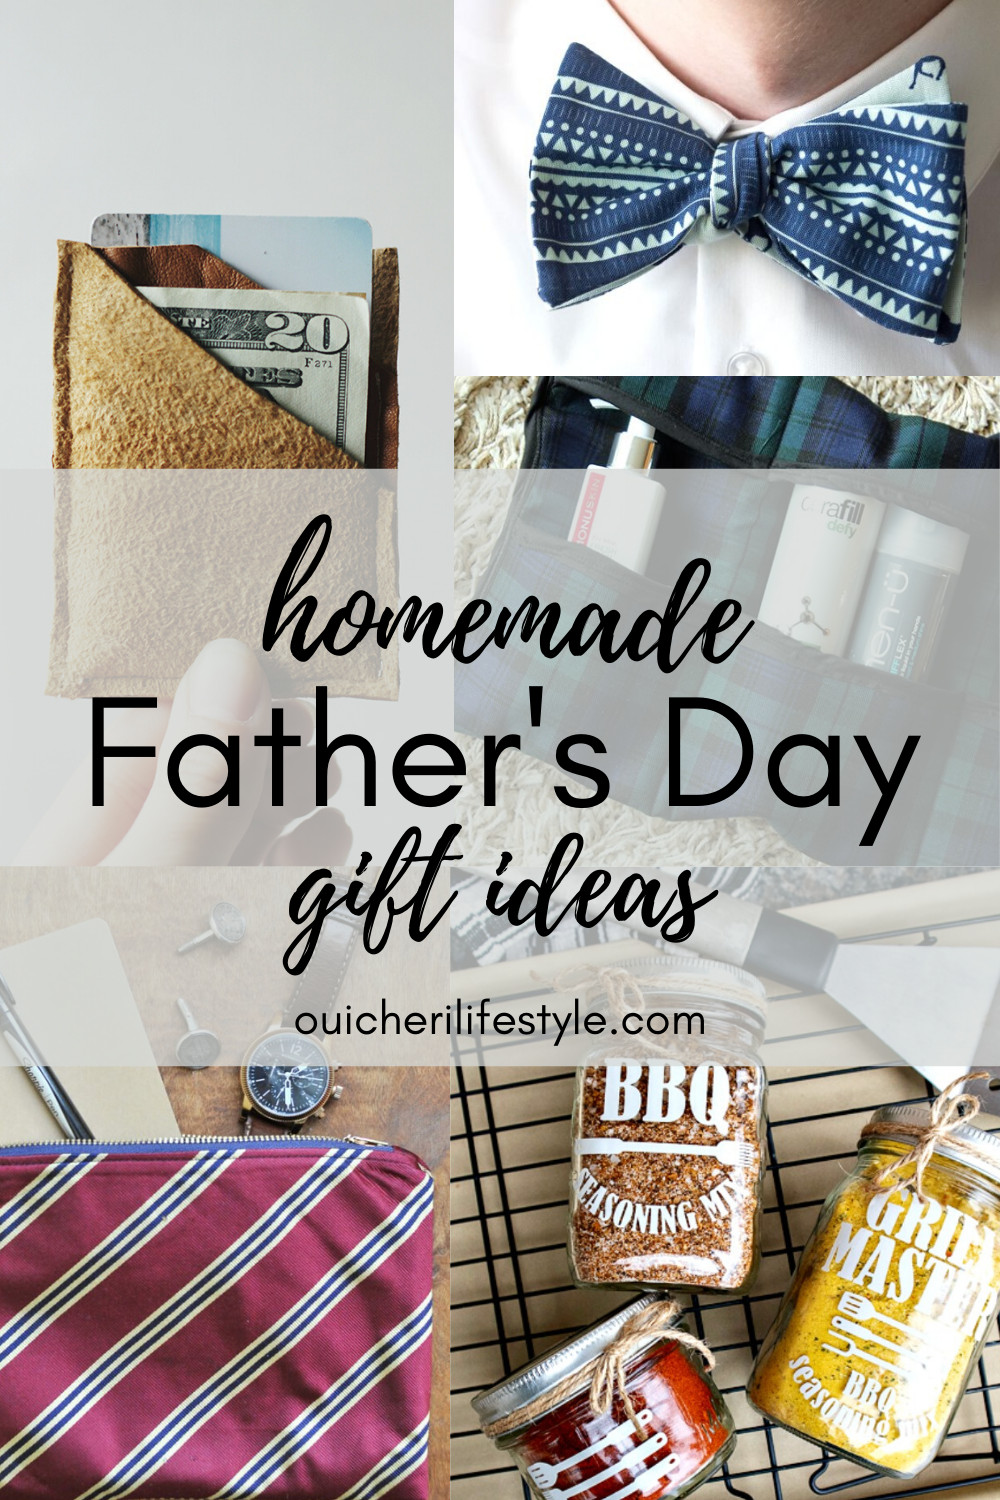 Homemade Father'S Day Gifts From Baby
 Homemade upcycled recycled t ideas for dad These